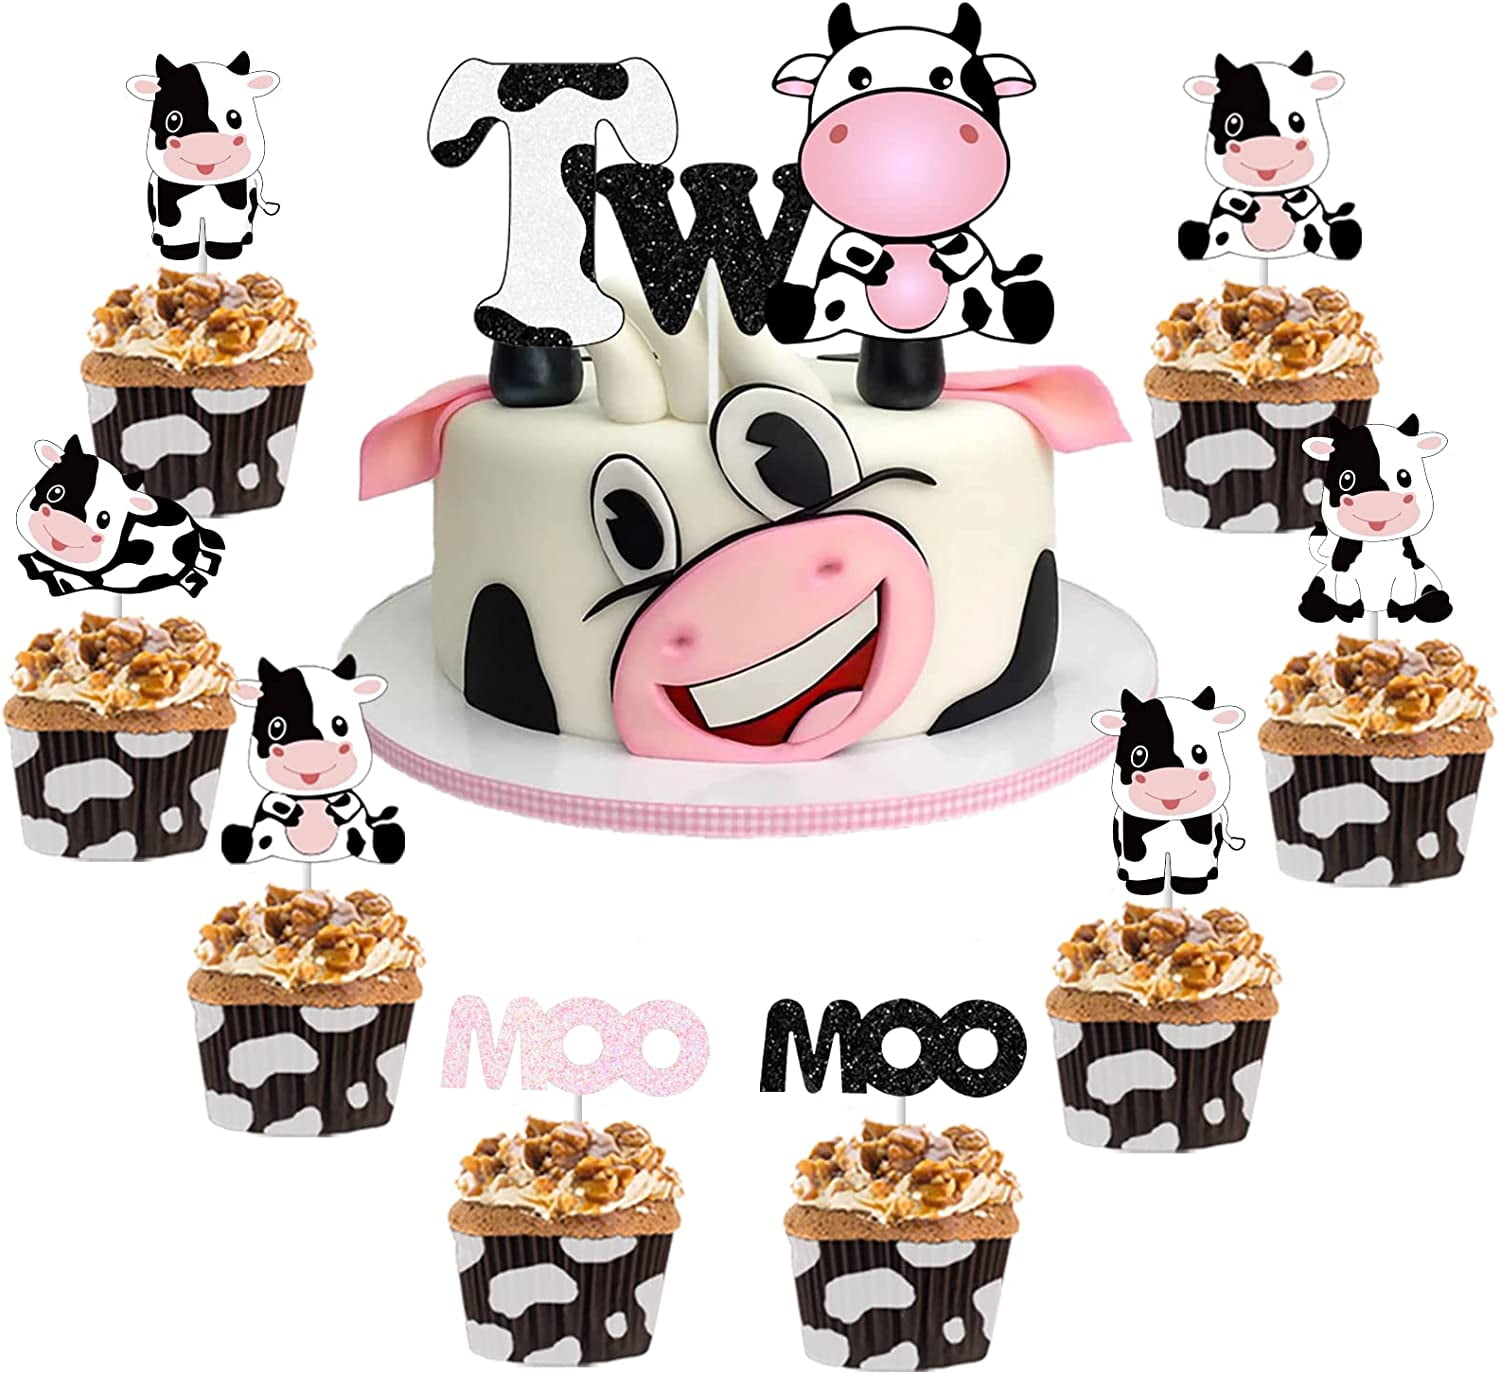 Happy Cow - Edible Cake Topper, Cupcake Toppers, Strips